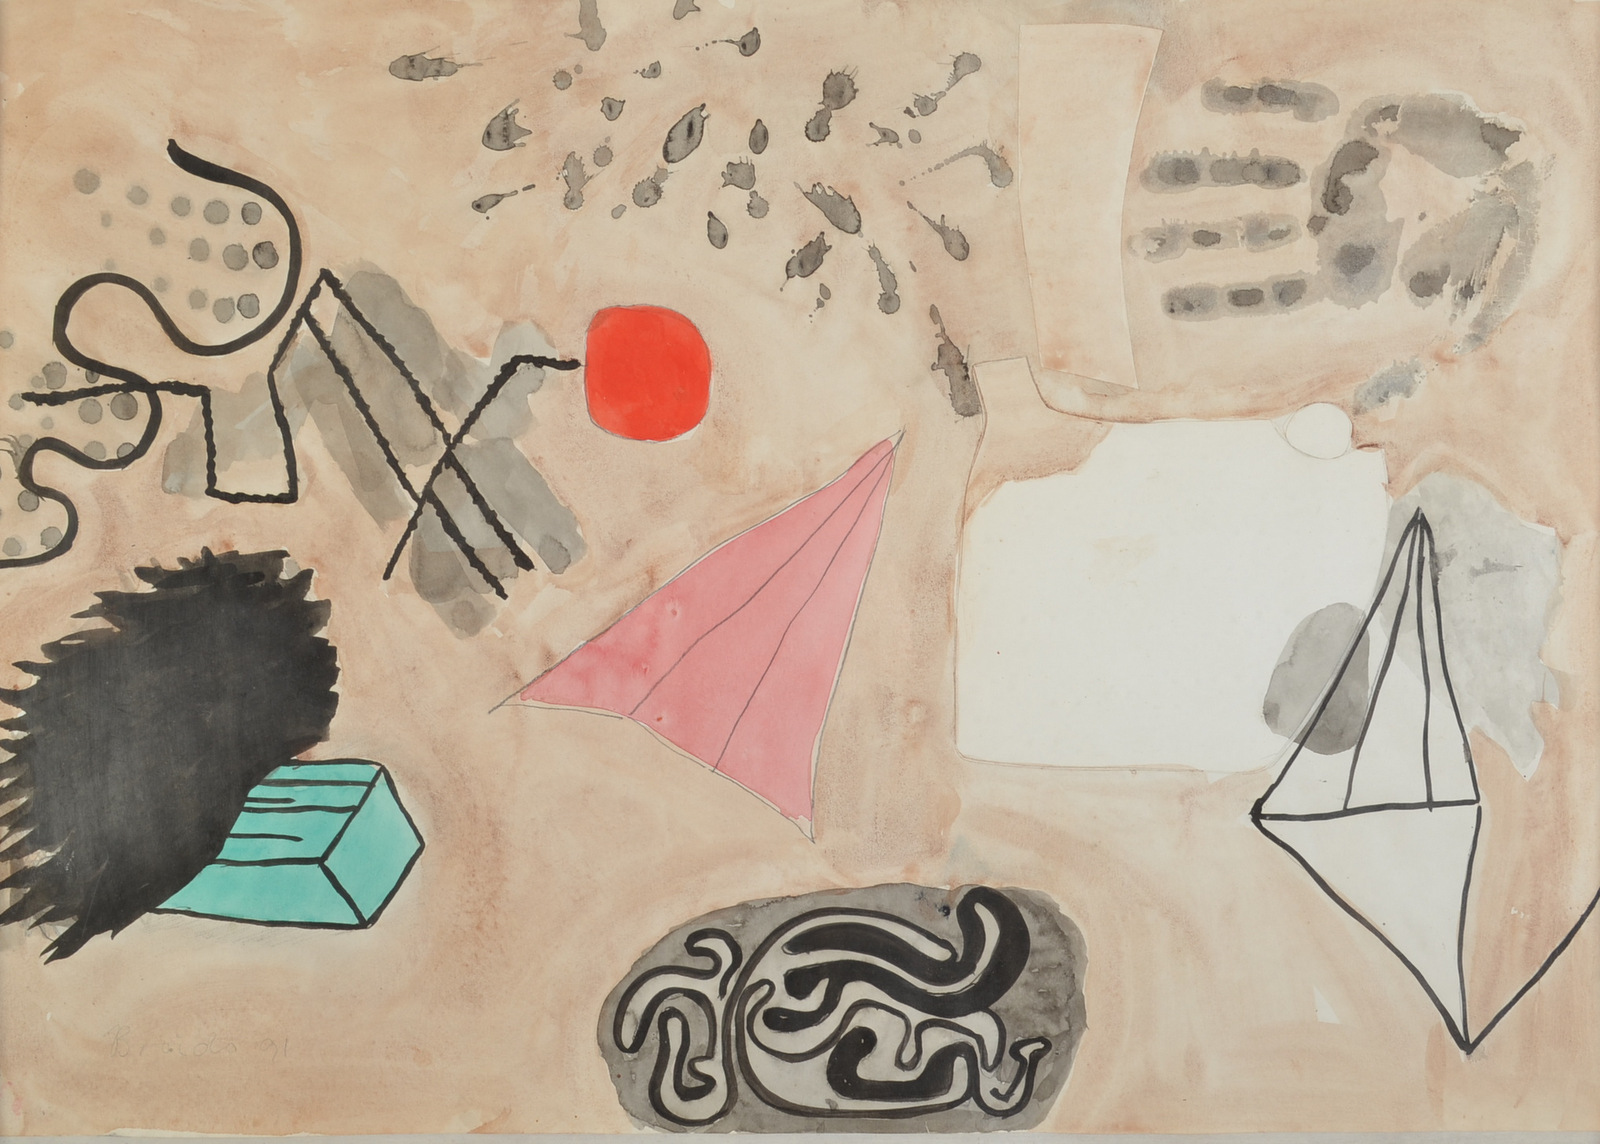 MICHAEL BROIDO
Untitled
Mixed media on paper
1991
69 x 50cm
The Michael Broido Collection
Michael